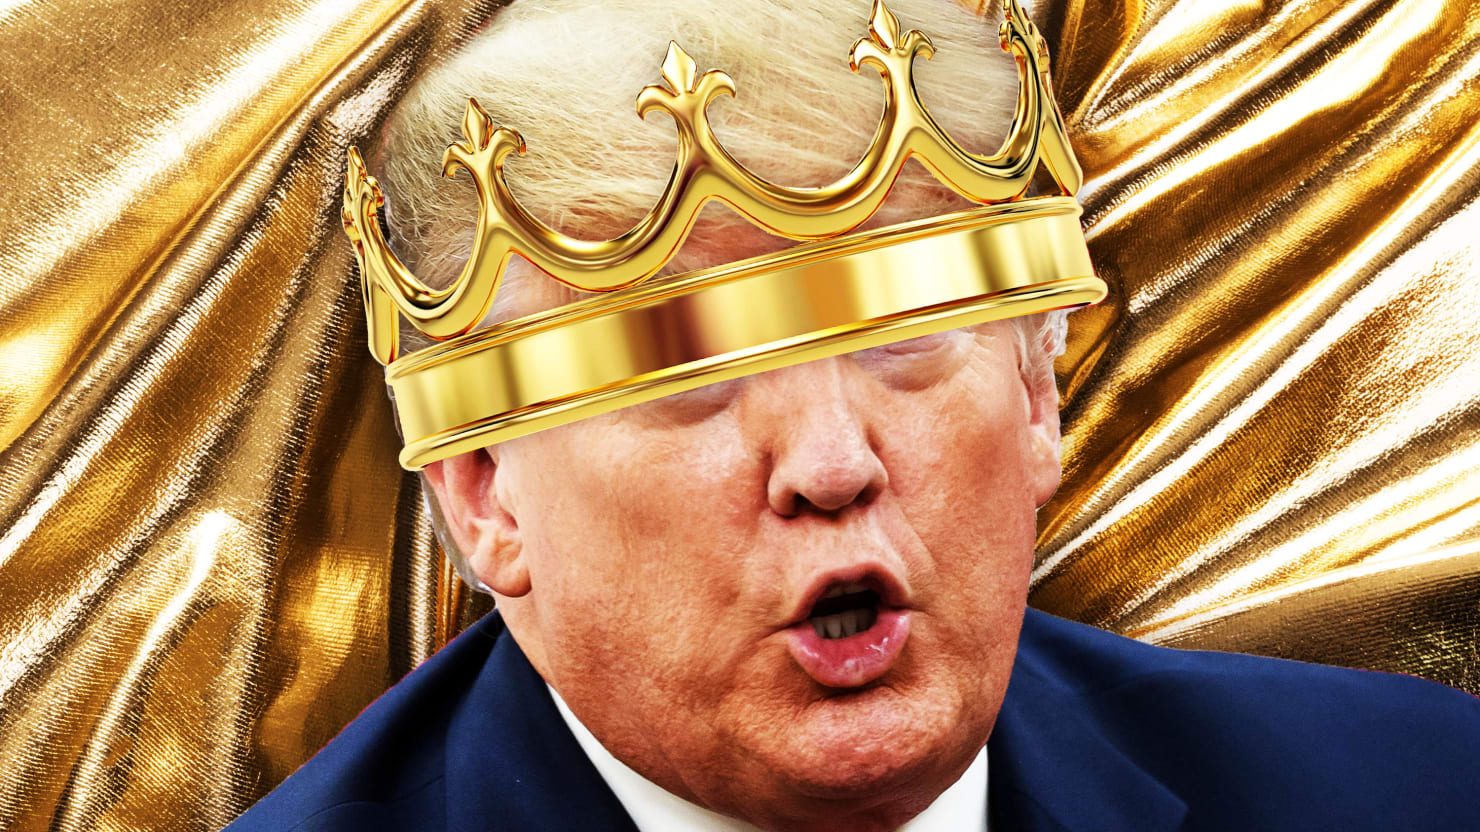 King Trump Wants Heads on Pikes. The GOP Can’t Wait to Oblige.